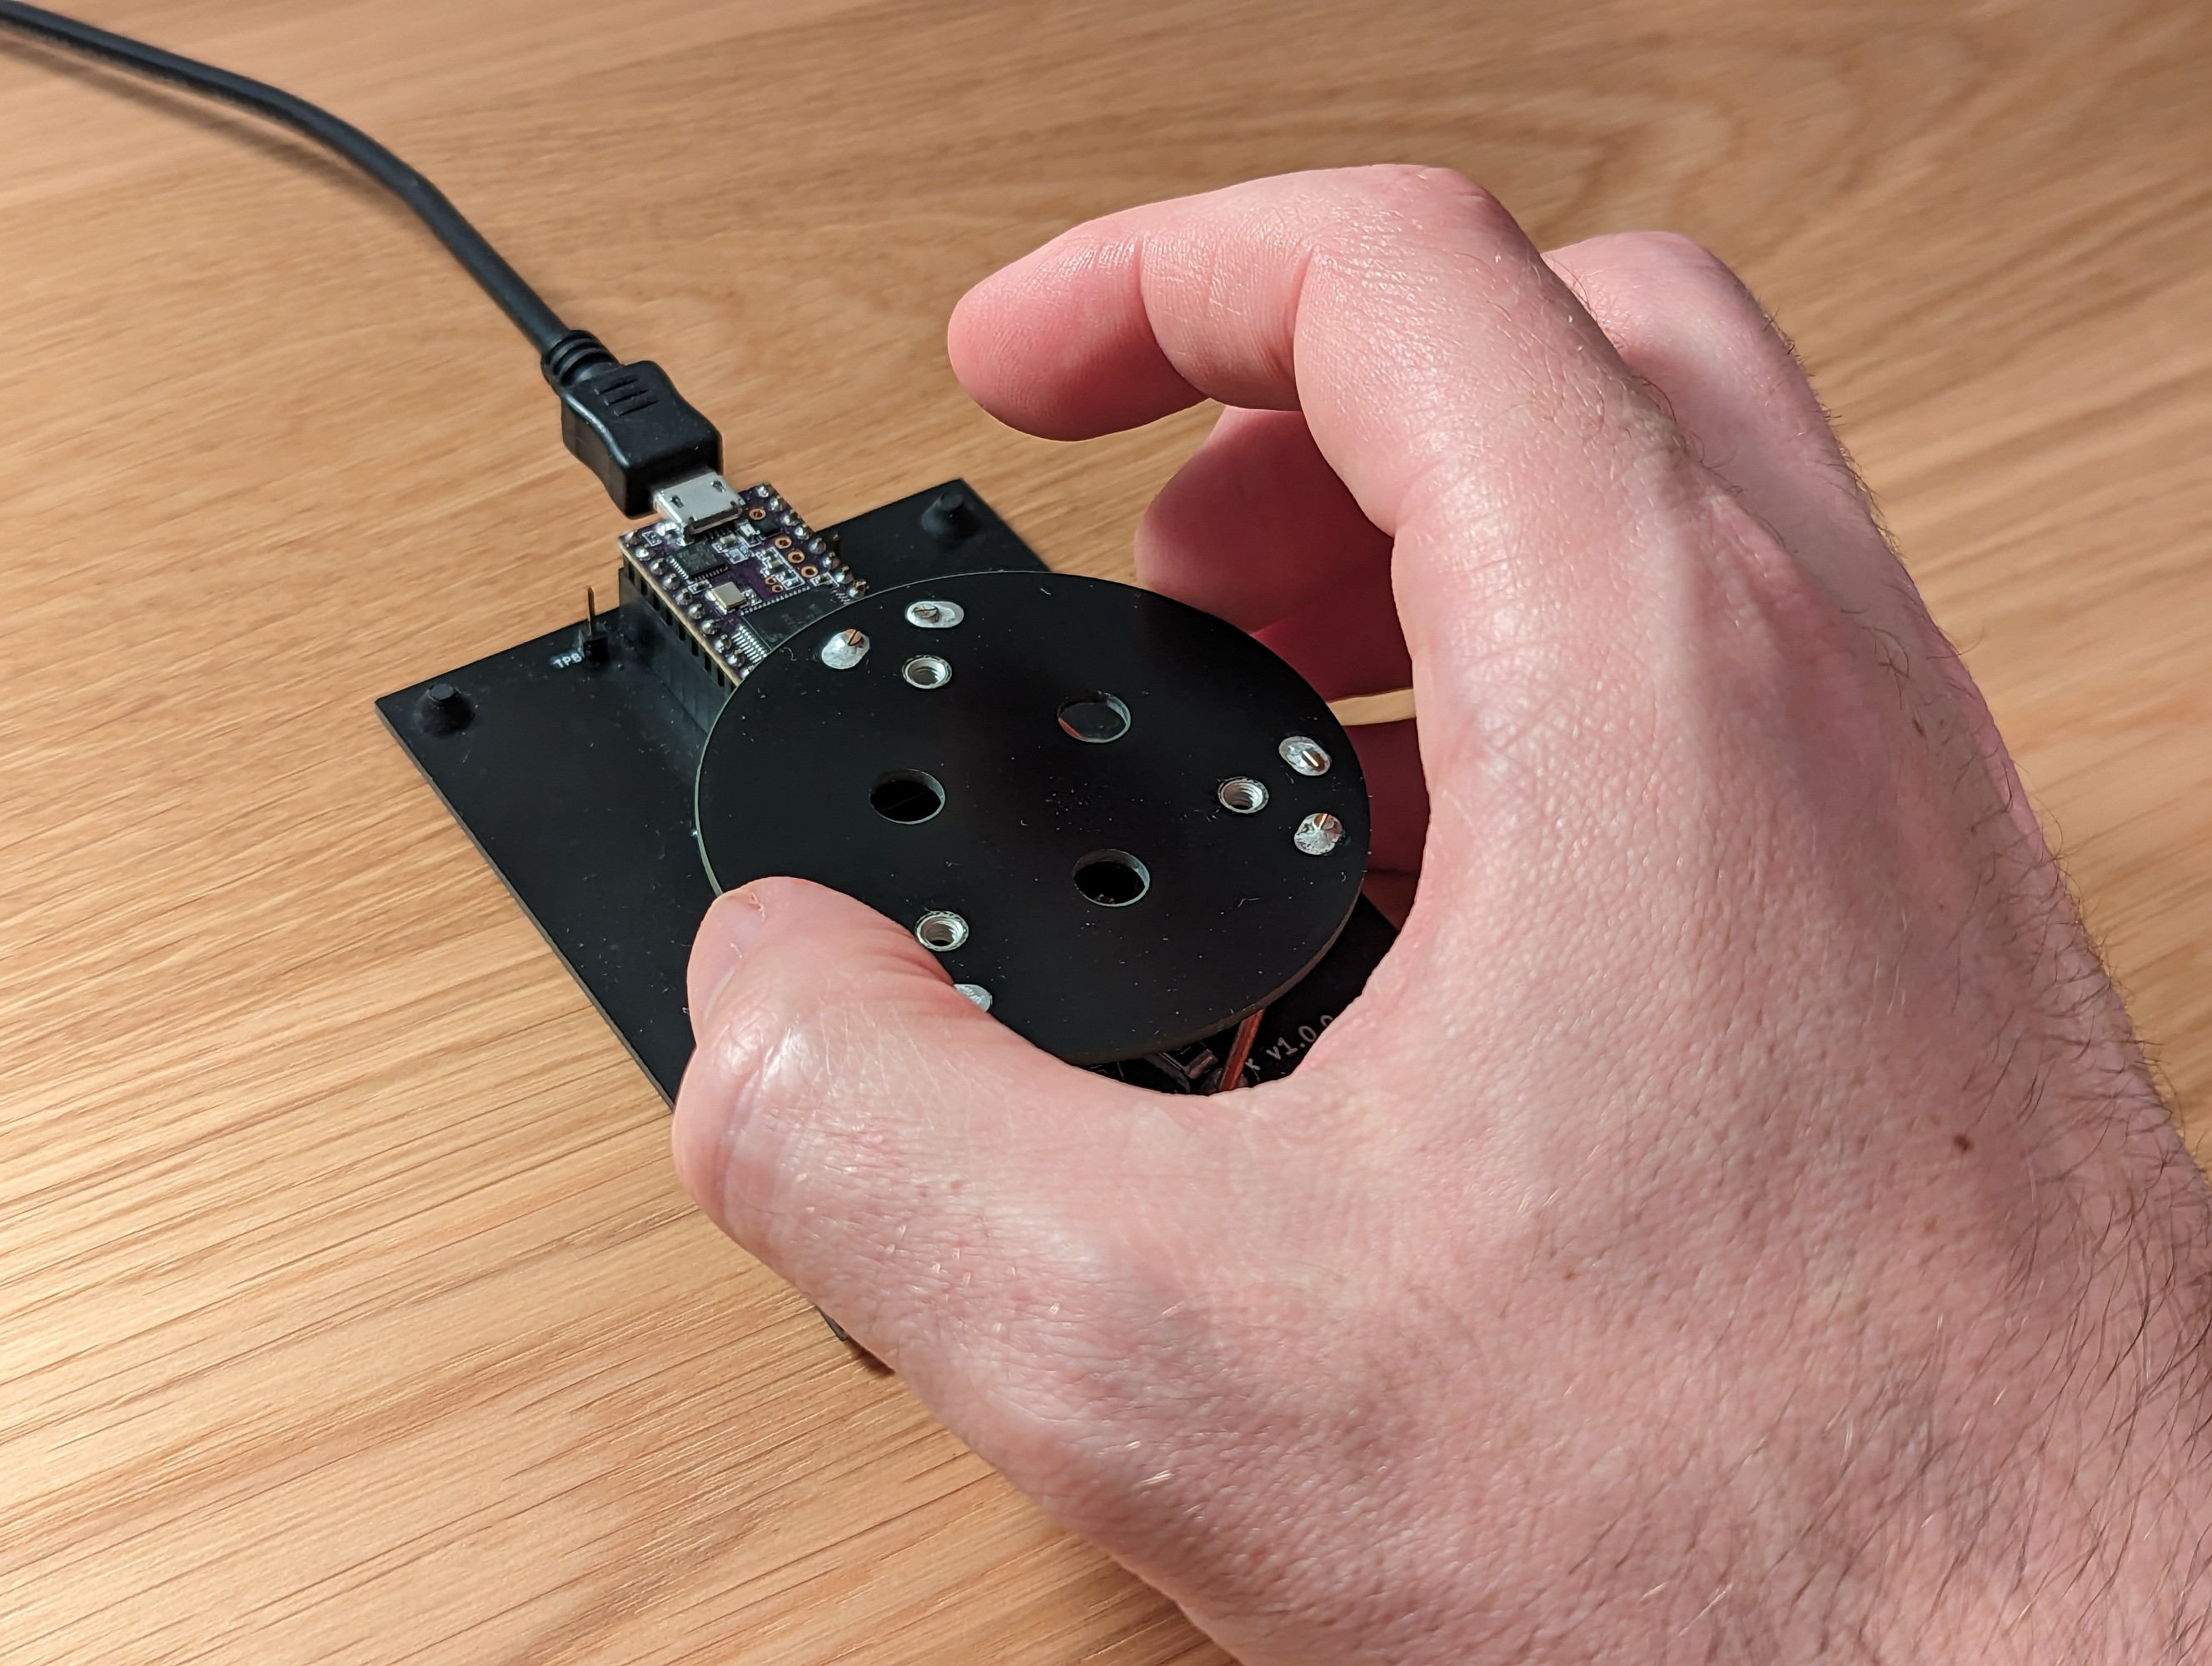 The Haptick device previously imaged with a hand grabbing the top disc-like circuit board.